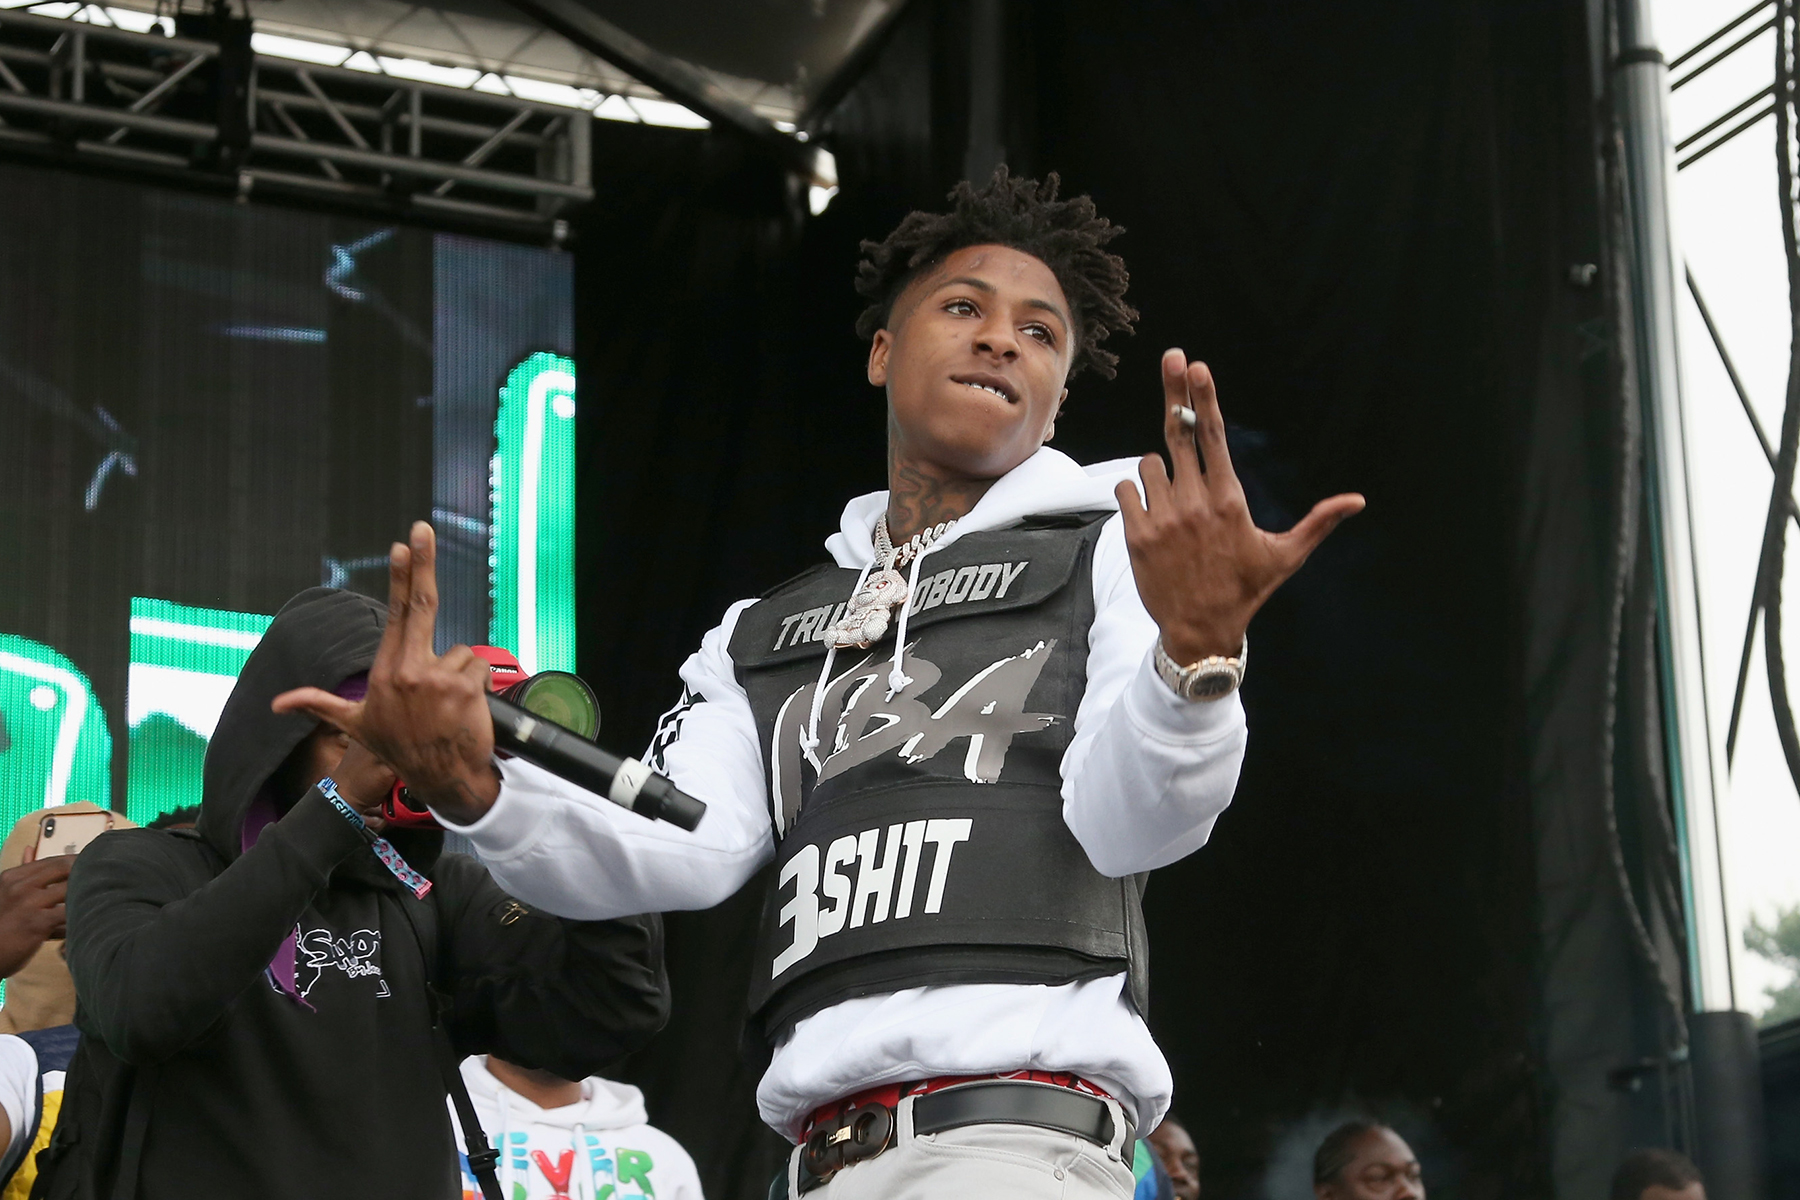 Judge Excludes NBA YoungBoy’s lyrics from His L.A. Trial